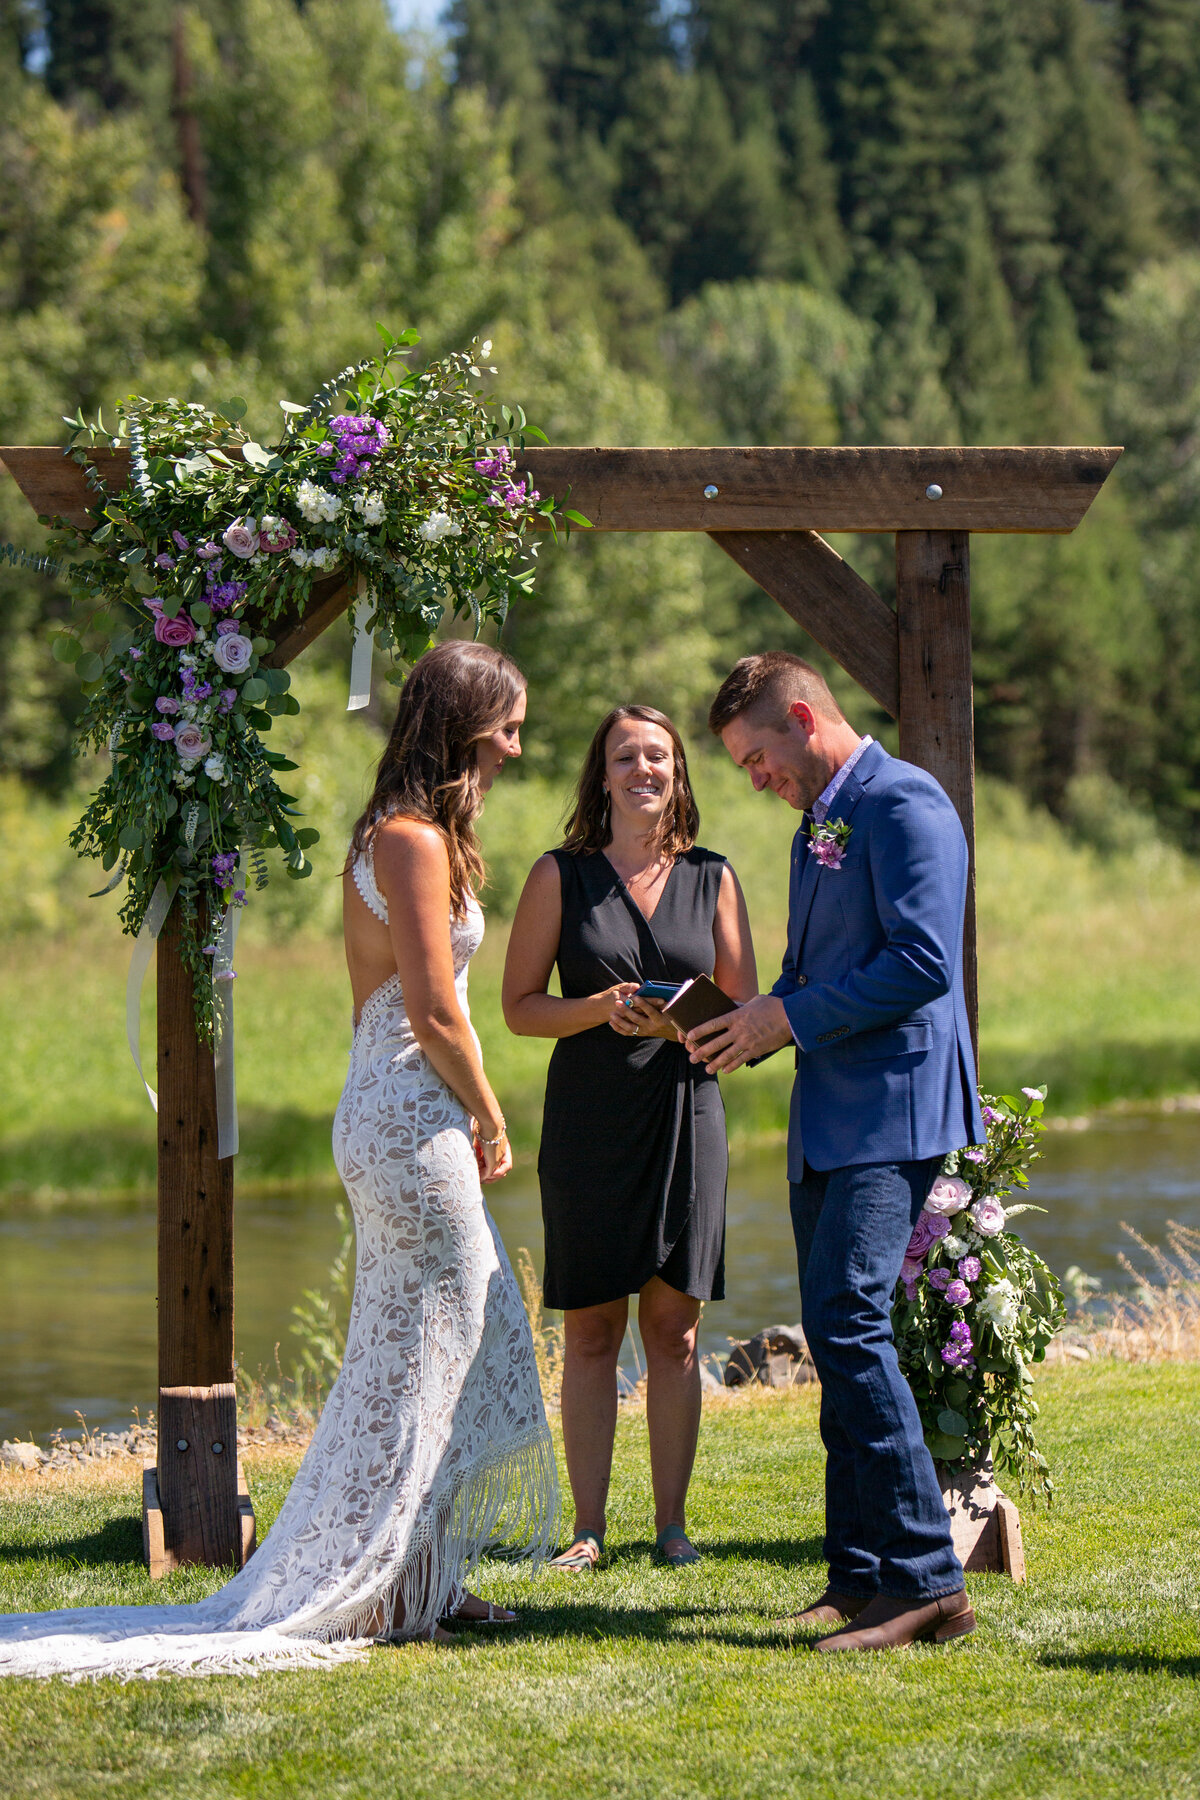 A bride and groom stand facing each other while their officiant stands behind them under a wooden arch with flowers.